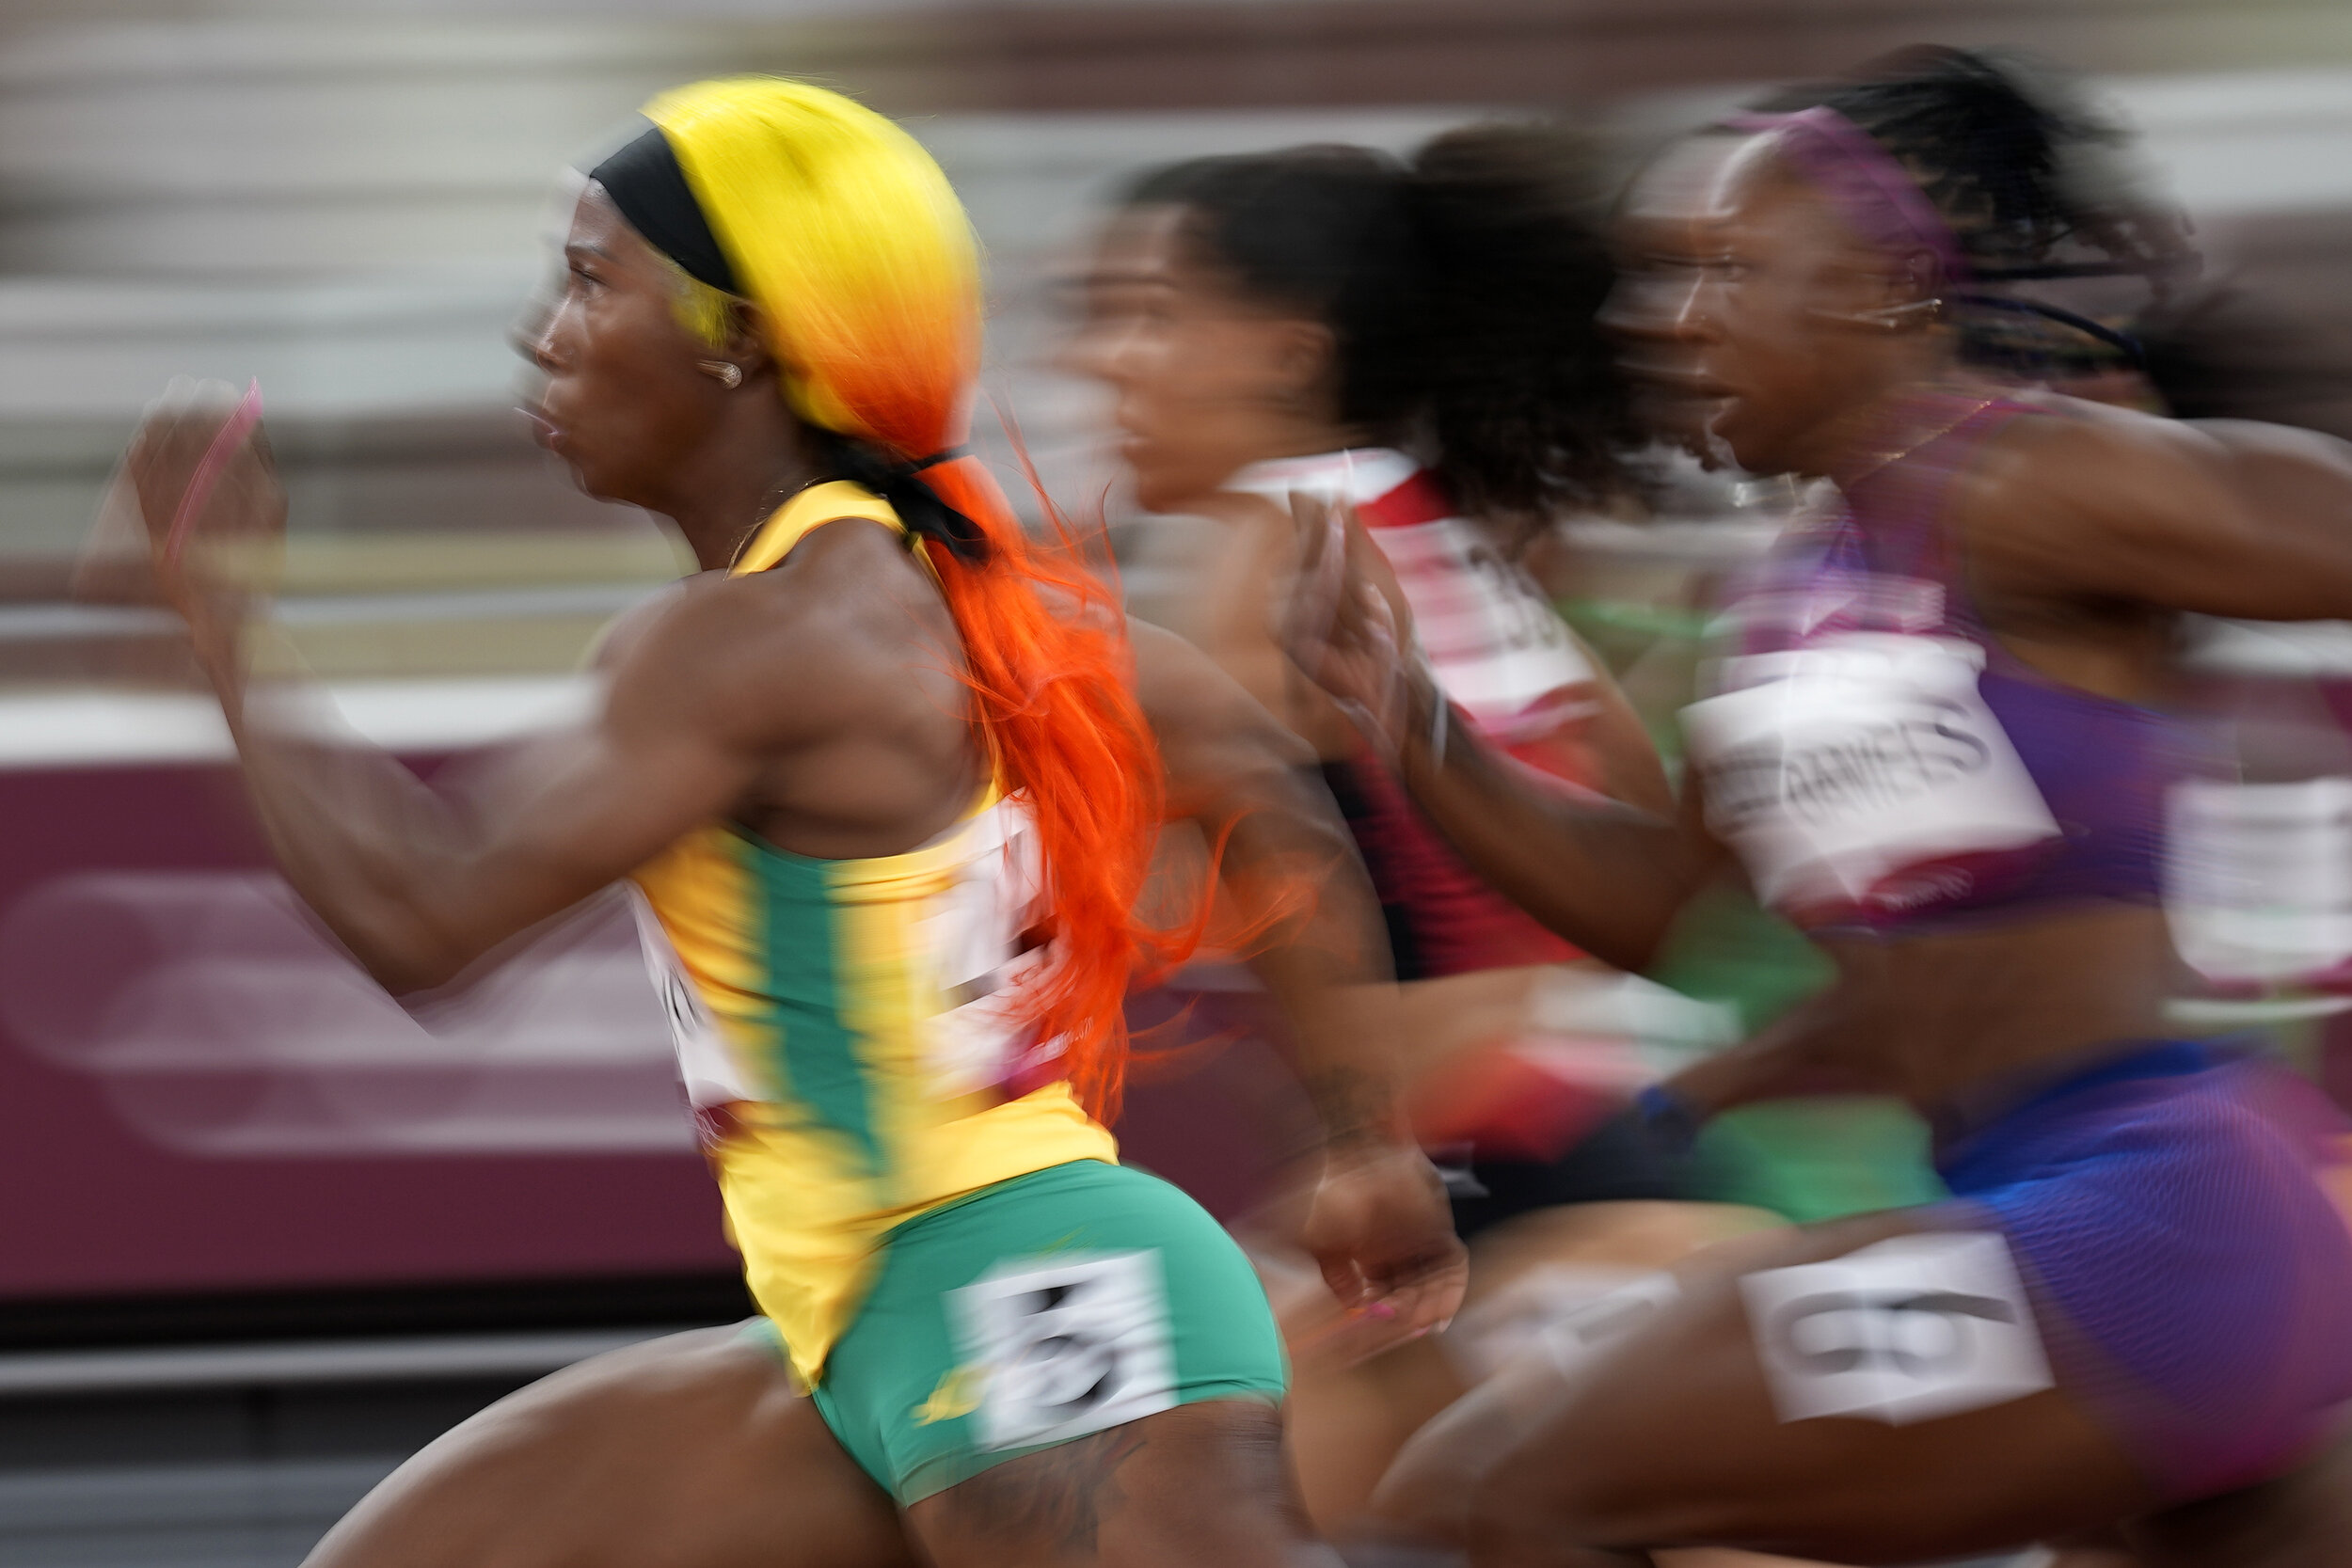  Shelly-Ann Fraser-Pryce, of Jamaica, runs in a semifinal of the women's 100-meters at the 2020 Summer Olympics, Saturday, July 31, 2021, in Tokyo. (AP Photo/David J. Phillip) 